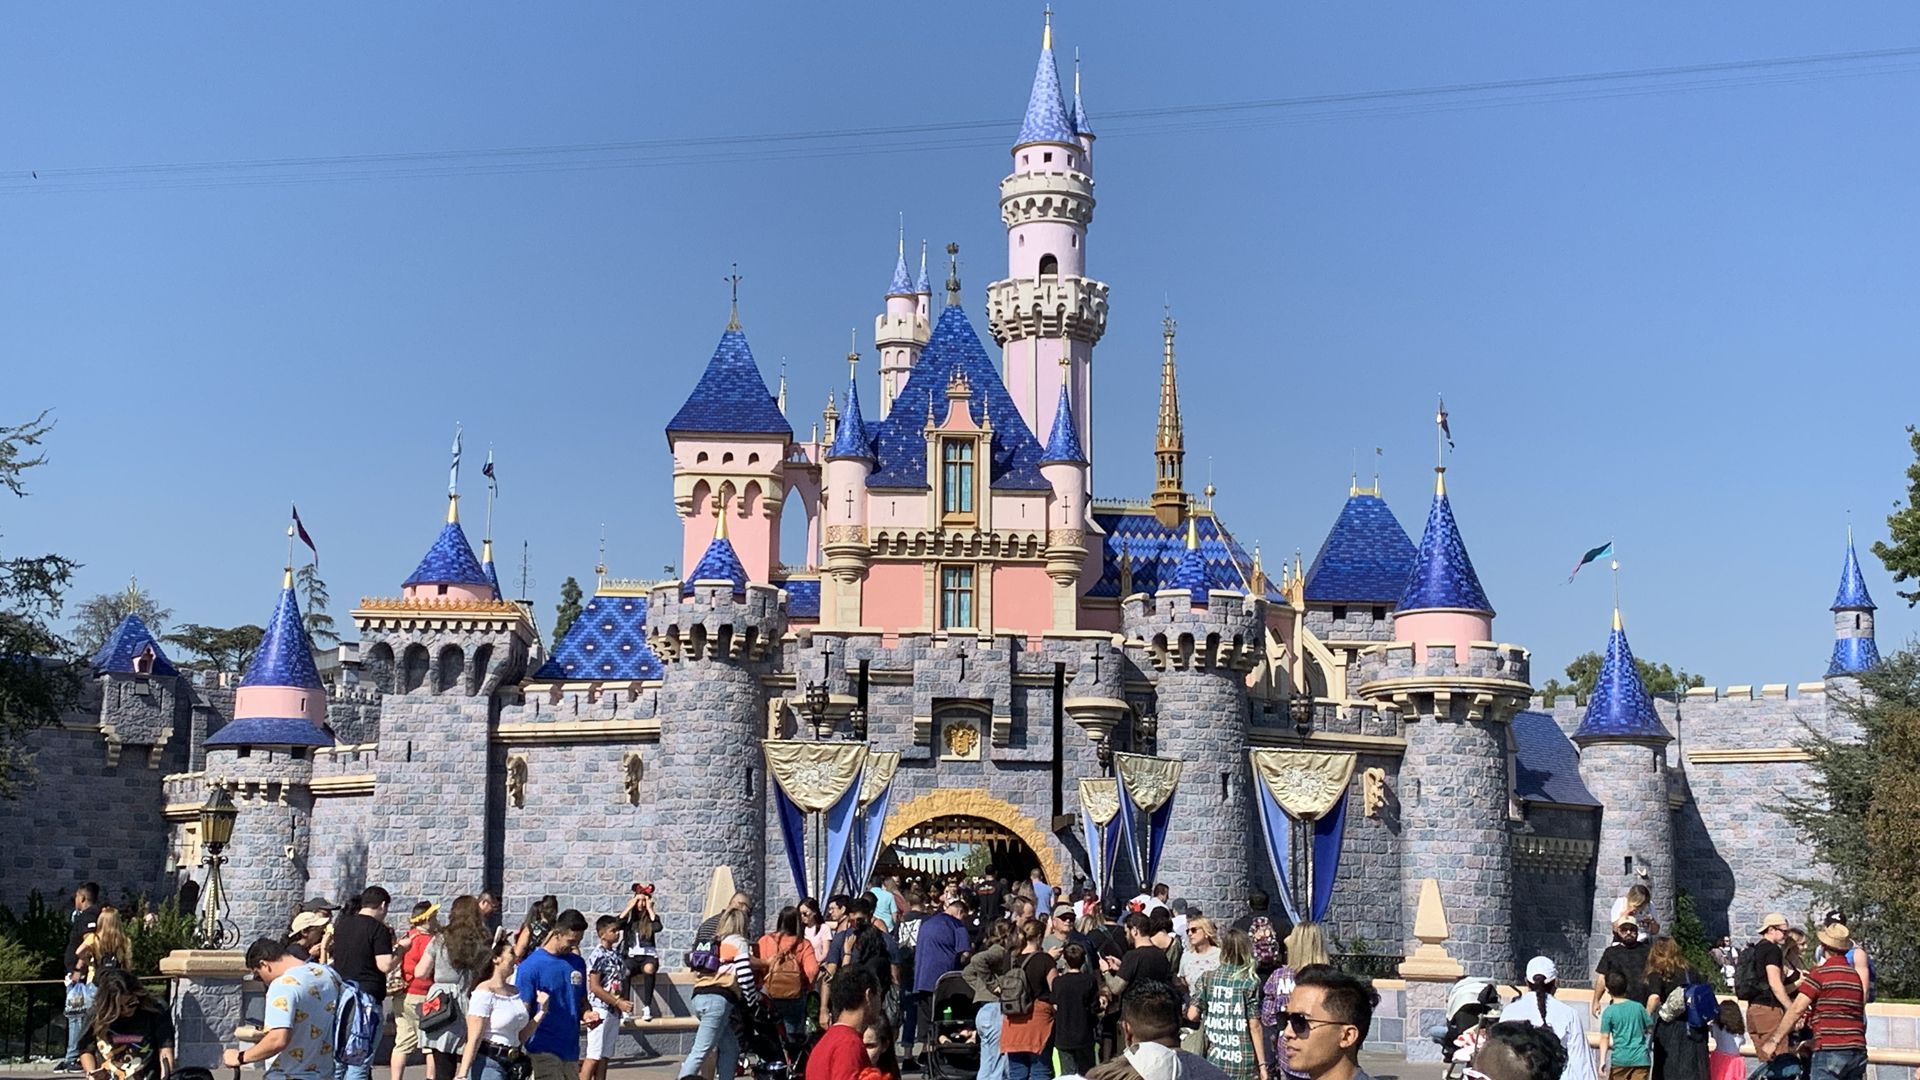 Disneyland Announces Changes To Park Hopping Rule, Will Make Ride Photo 'complimentary'. WJET WFXP YourErie.com